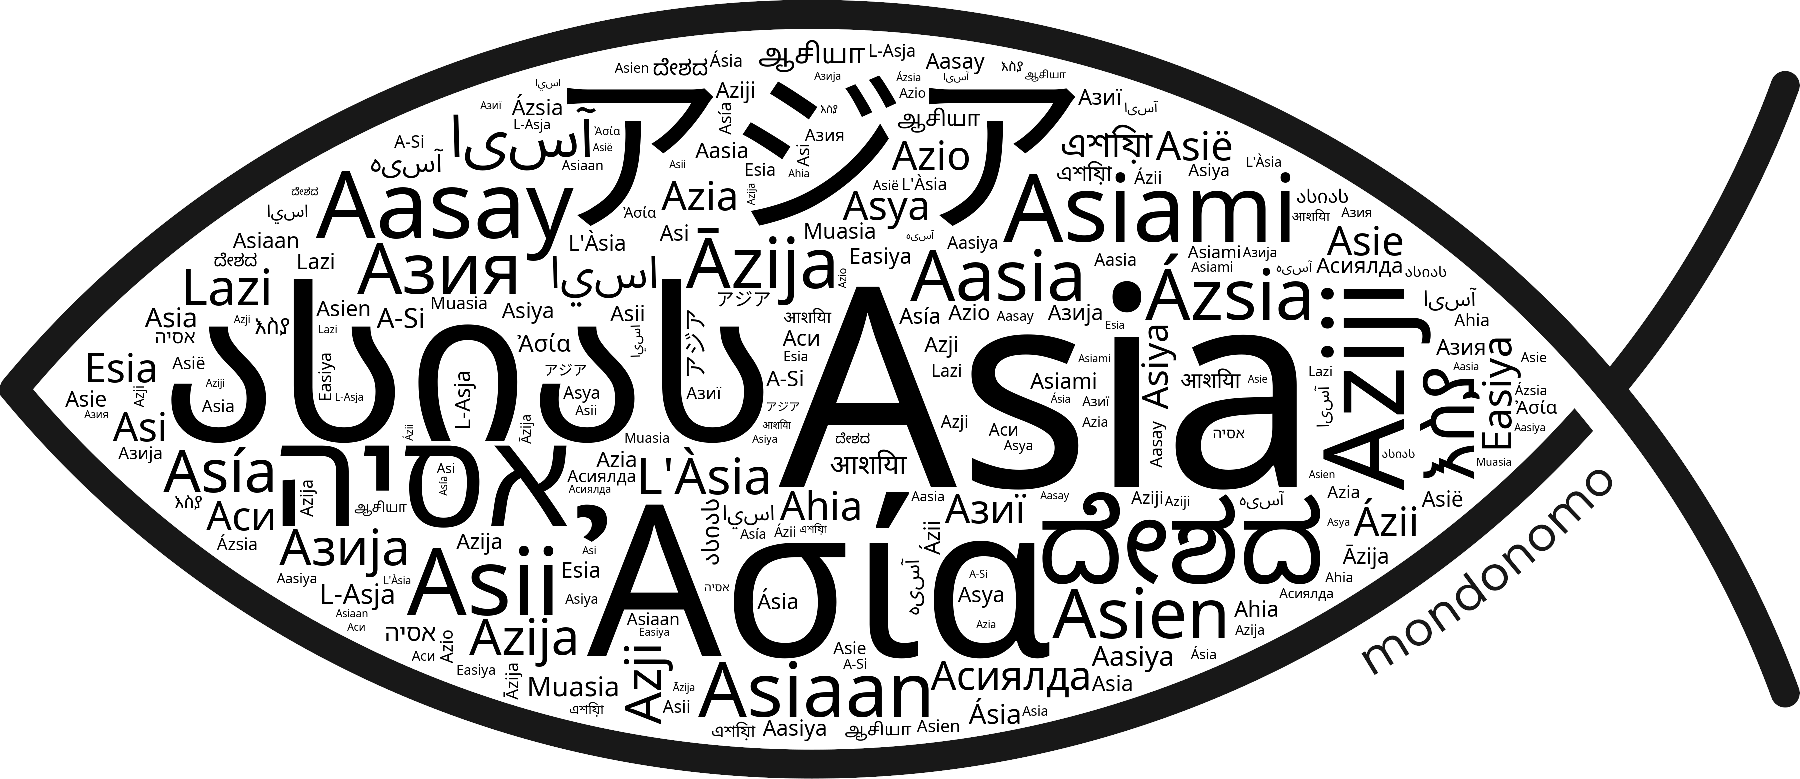 Name Asia in the world's Bibles